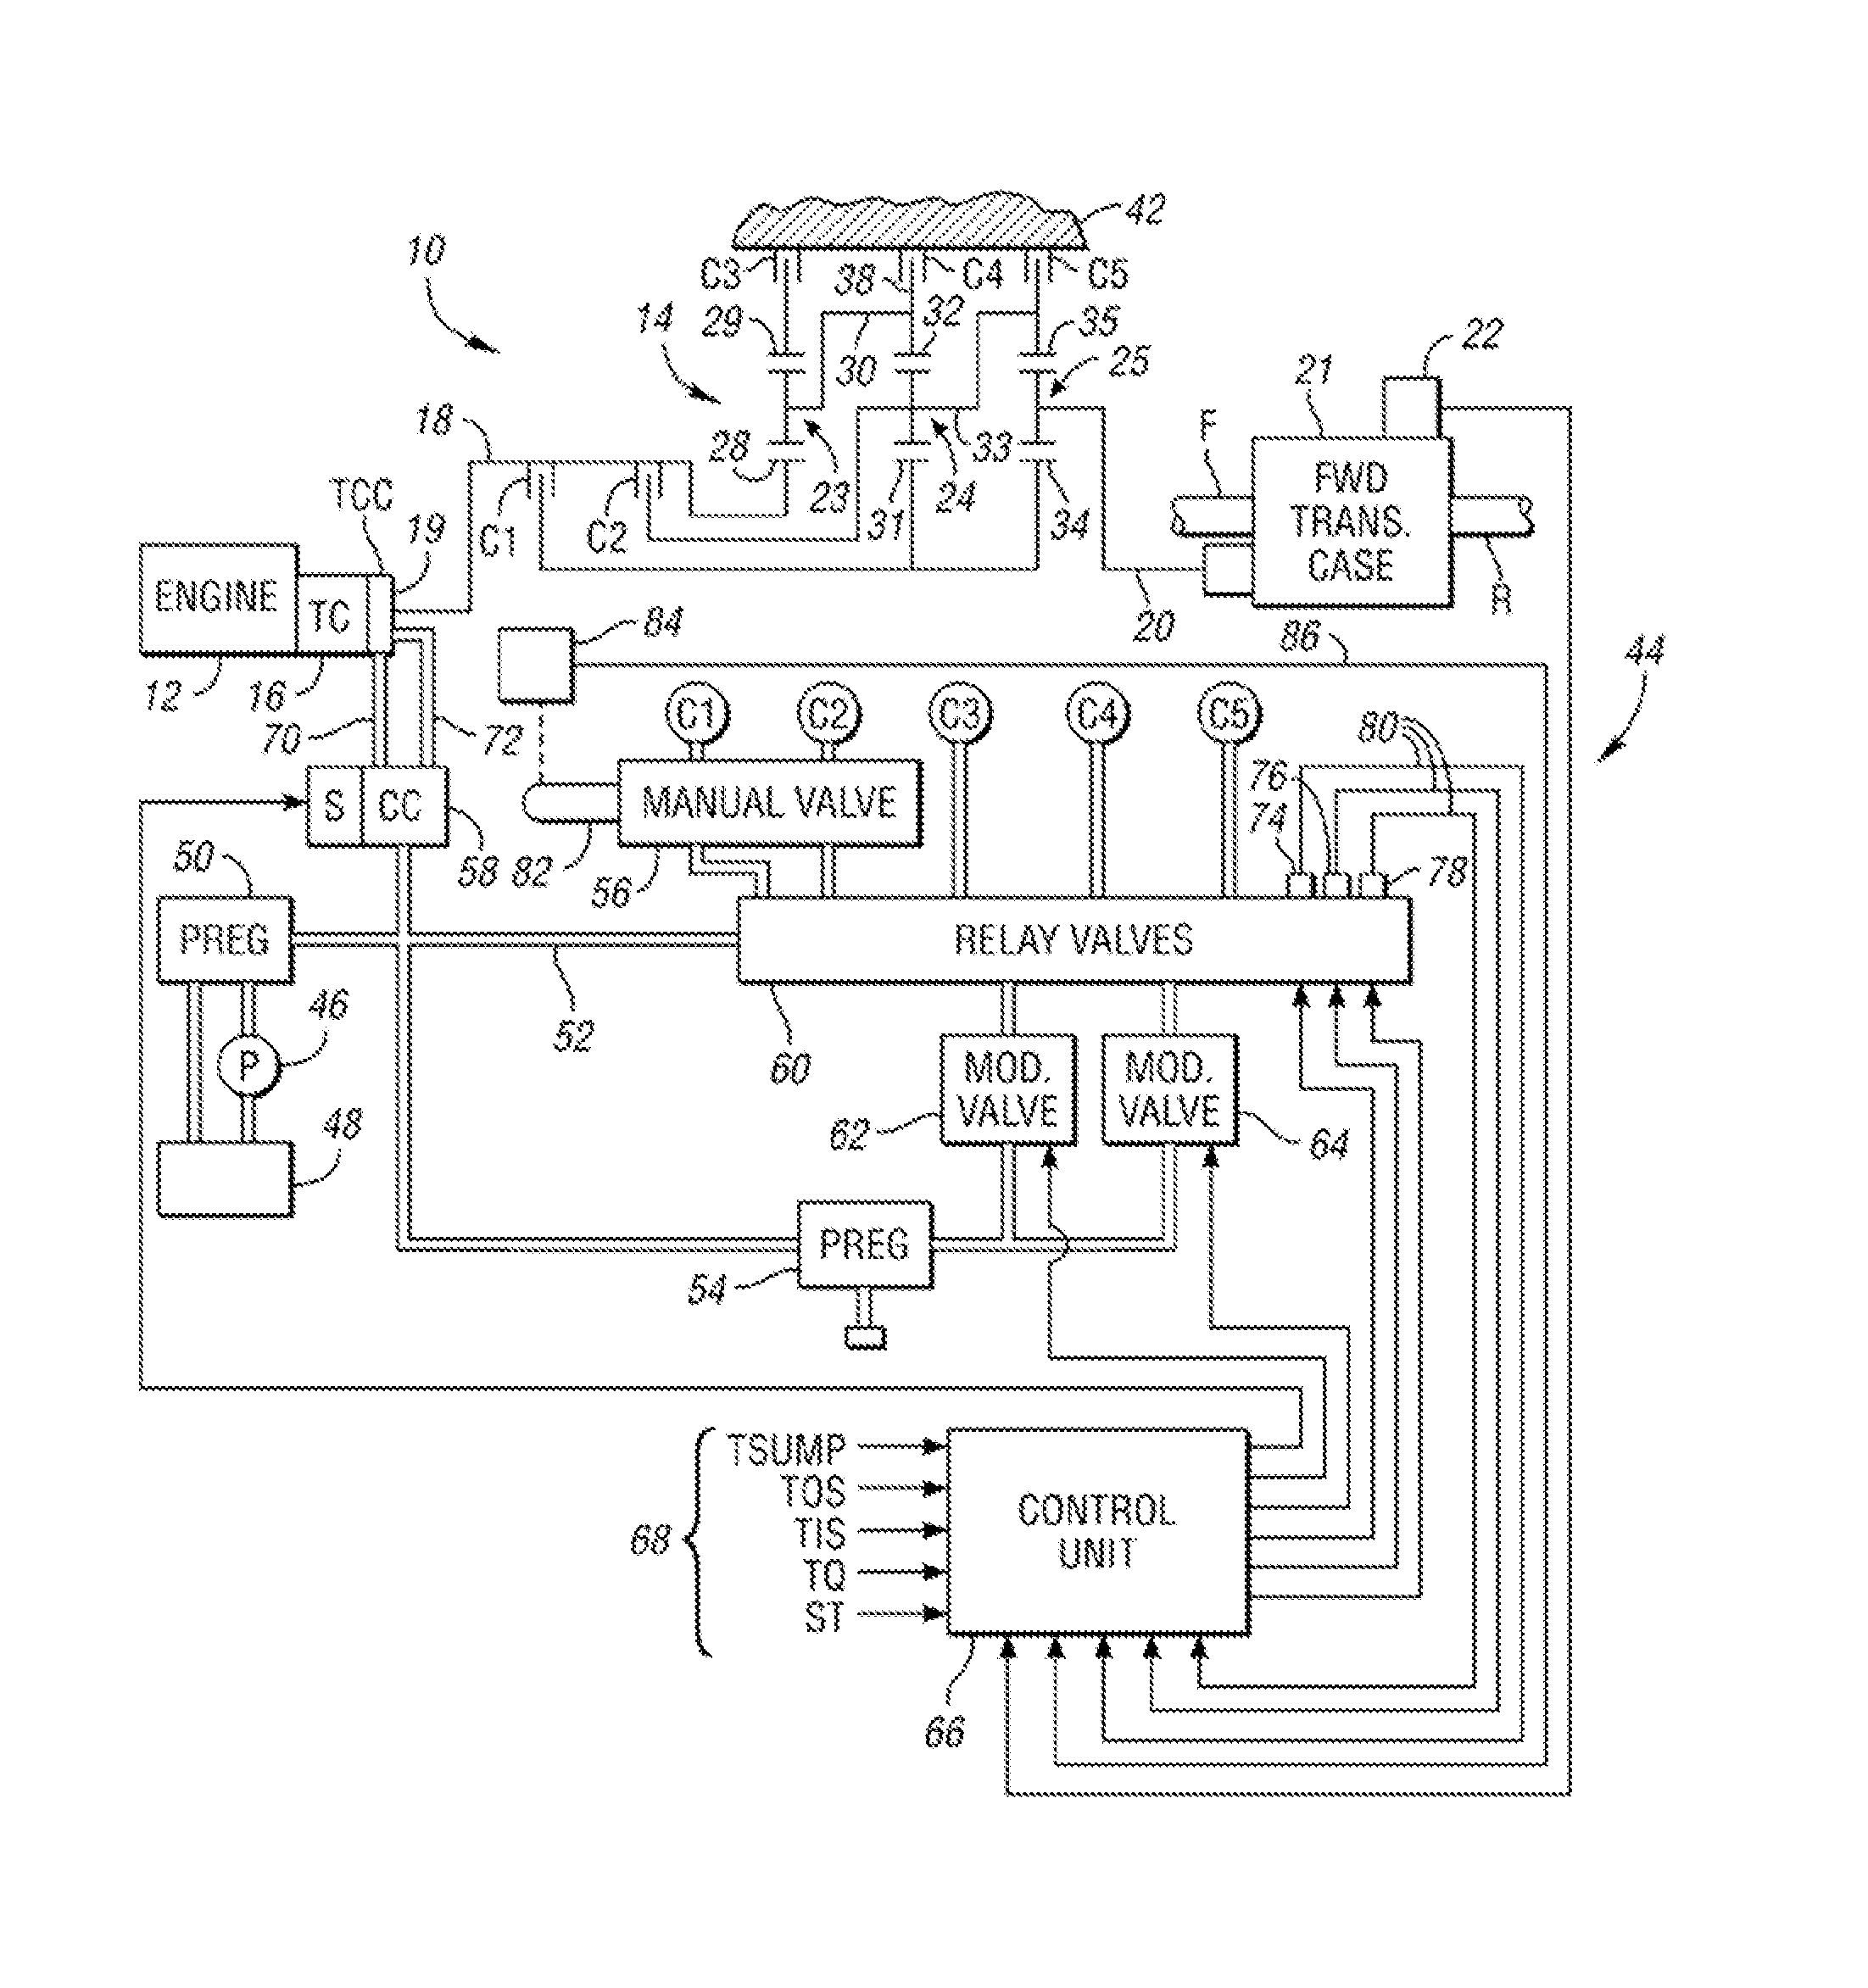 Method for performing high throttle neutral to range shifts